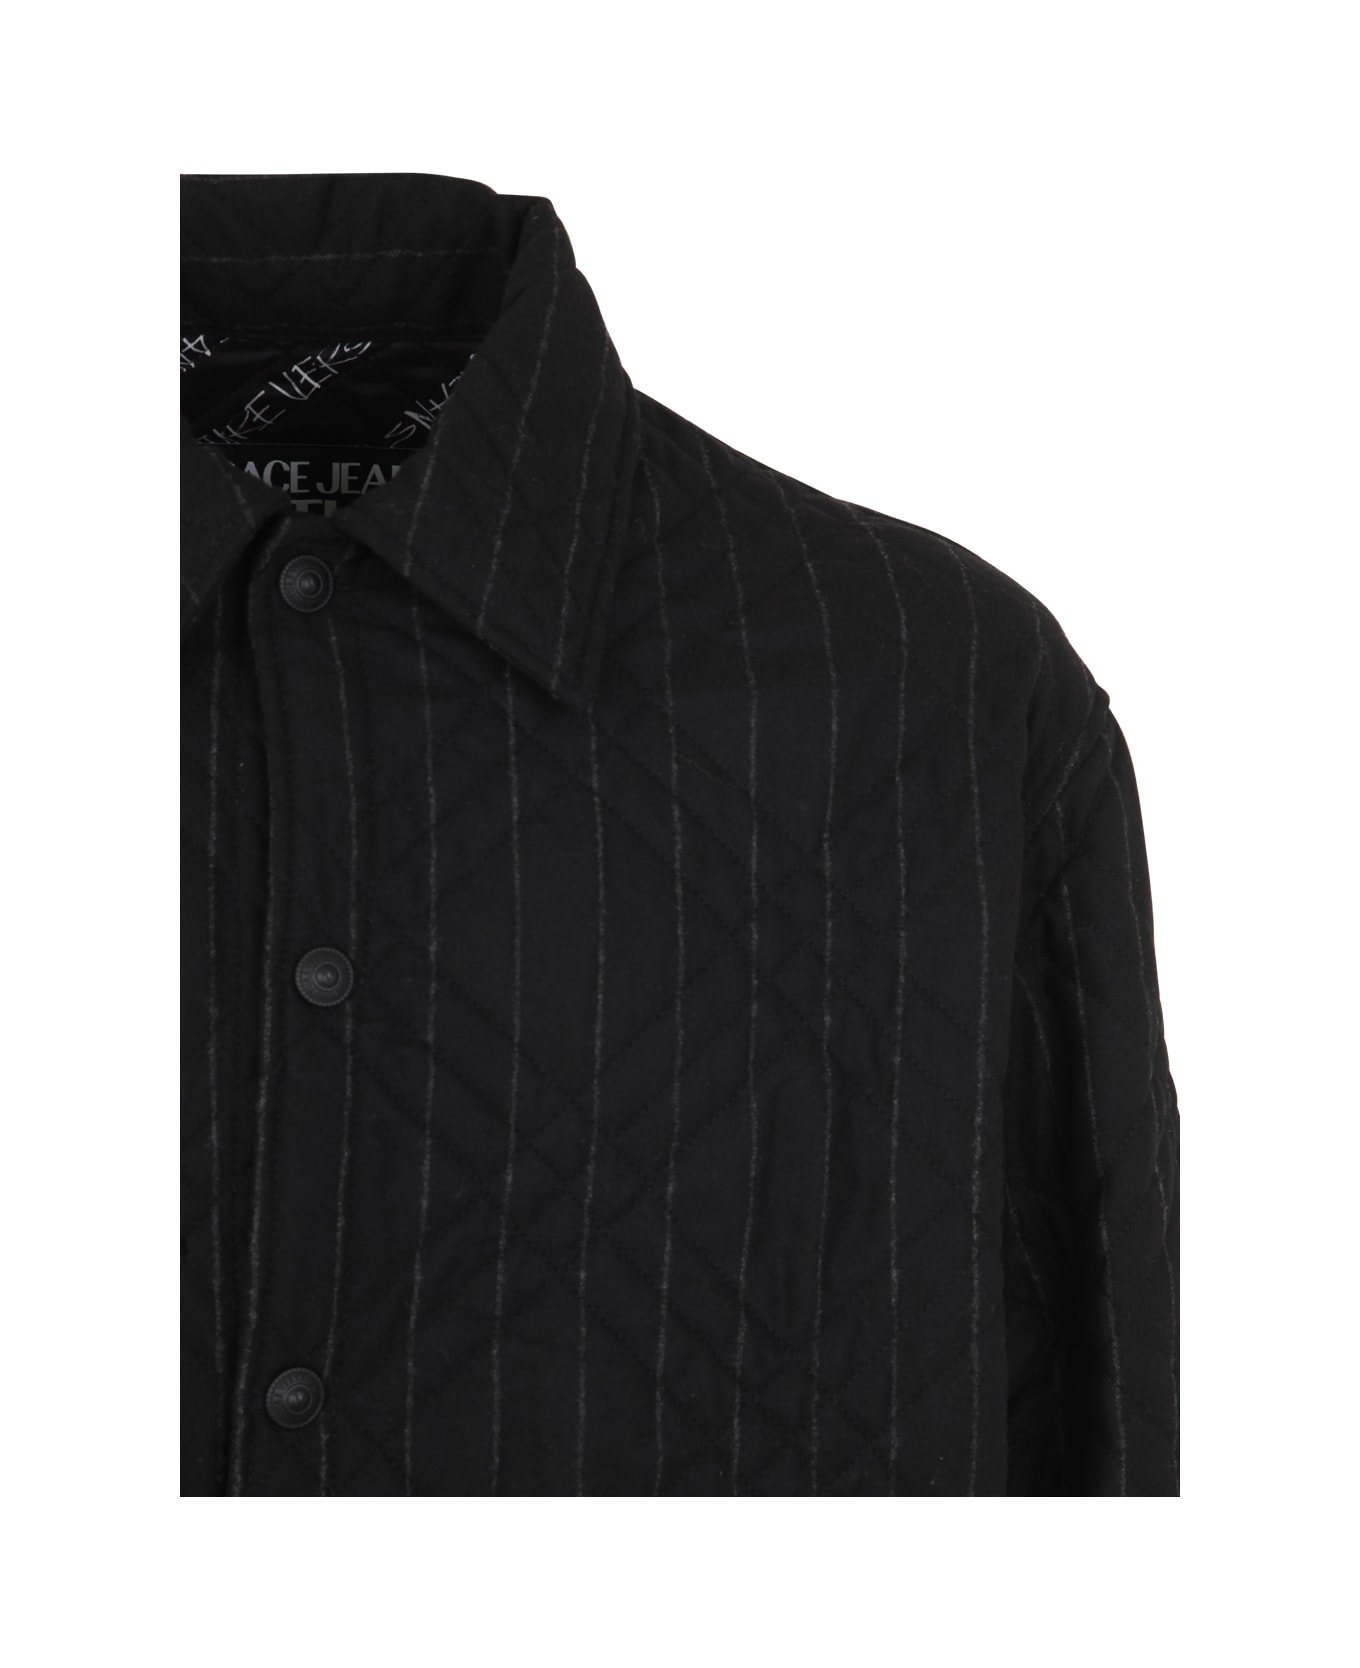 Versace Jeans Couture Pinstriped Jacket - Black ジャケット